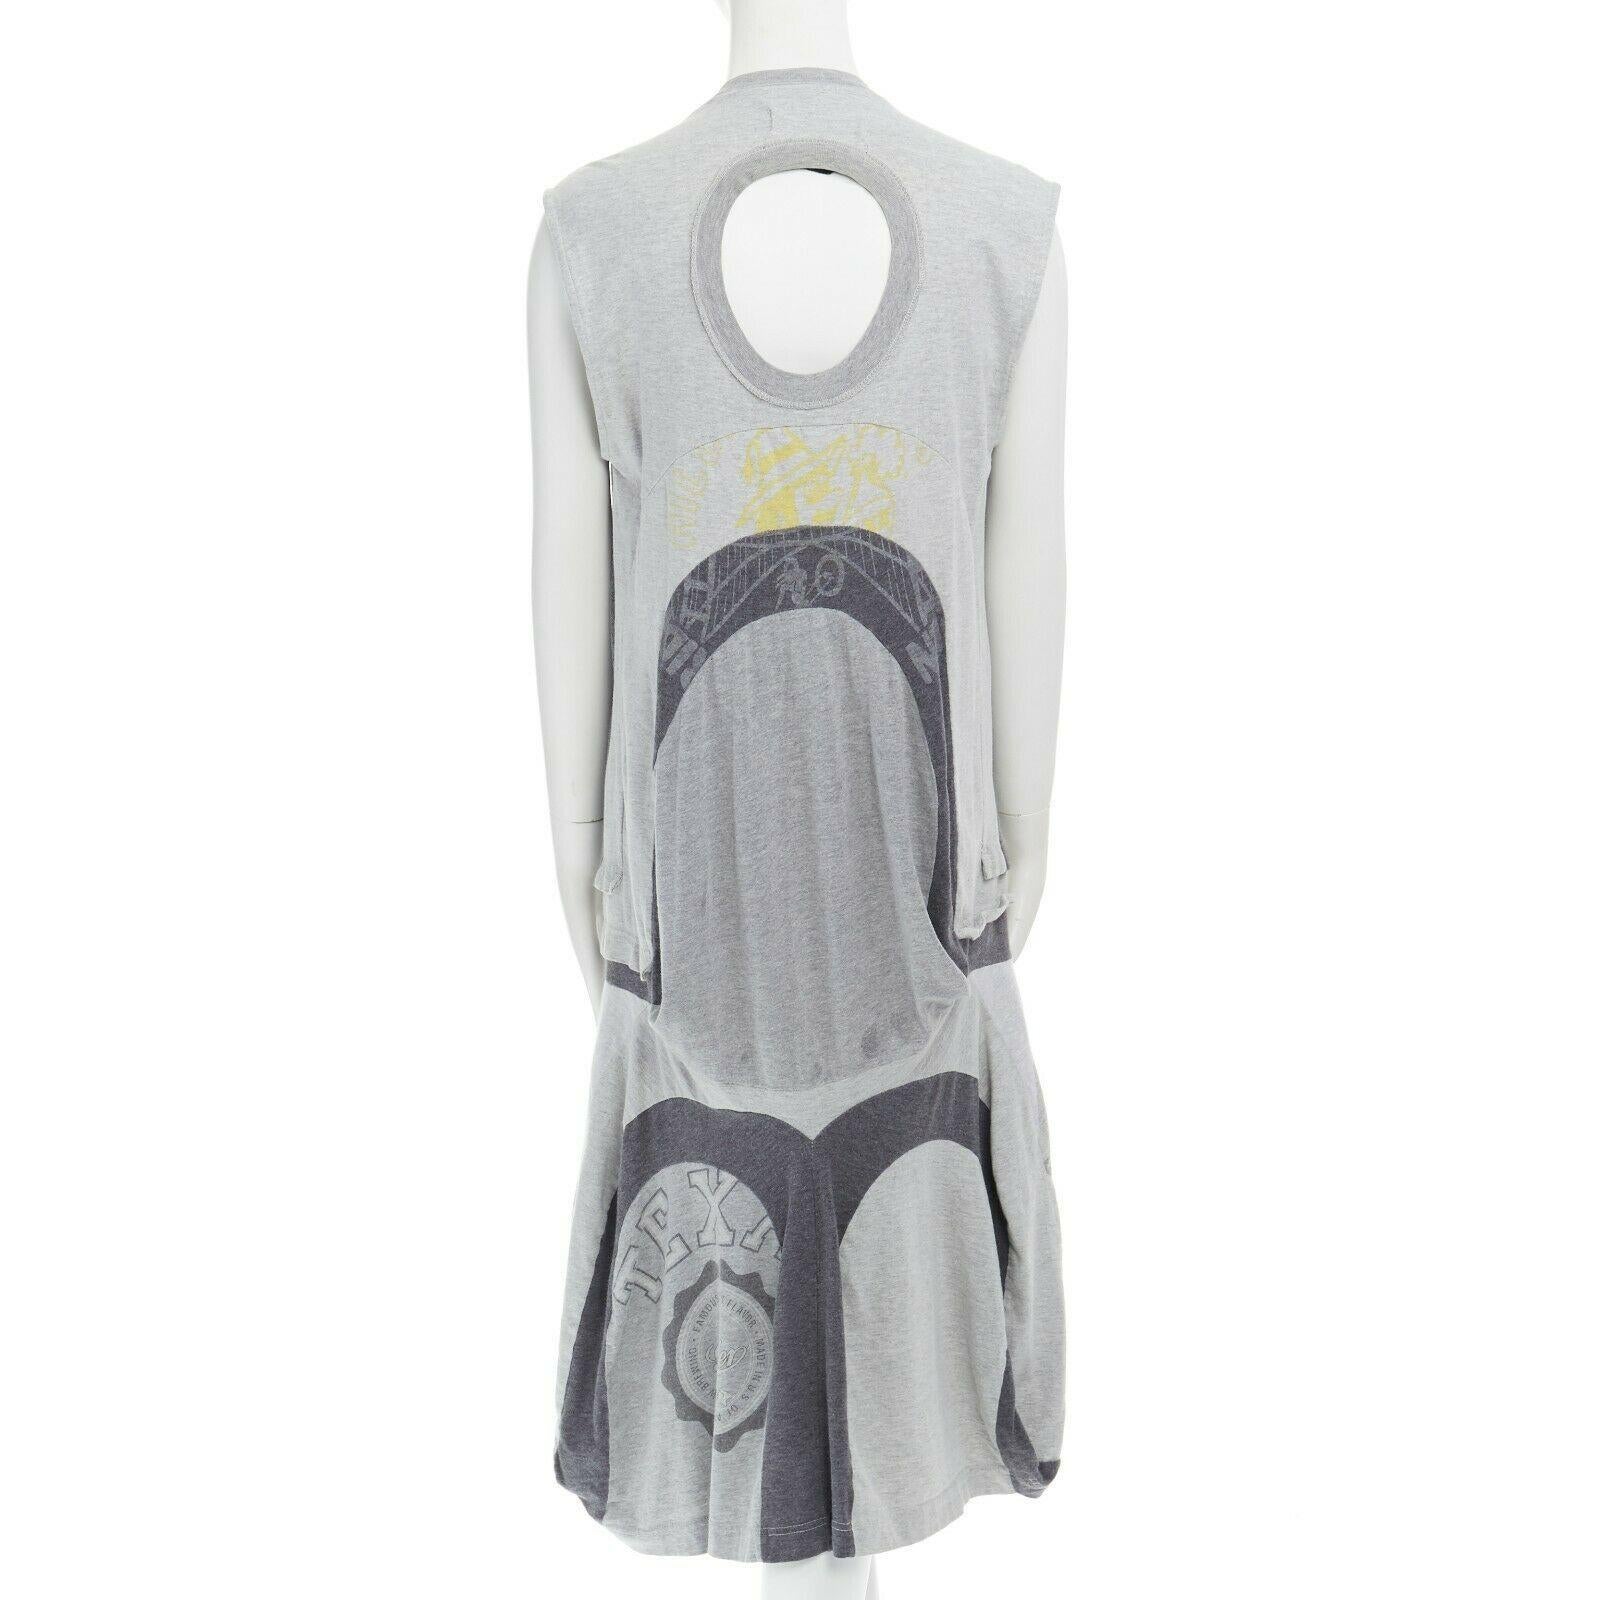 runway JUNYA WATANABE SS2006 grey reconstructed vintage tee cut out dress S US4

JUNYA WATANABE
FROM THE SPRING SUMMER 2006 RUNWAY
100% cotton . Reconstructed from vintage printed cotton tee . Classic crew neck . 
Grey sleeveless printed cotton top